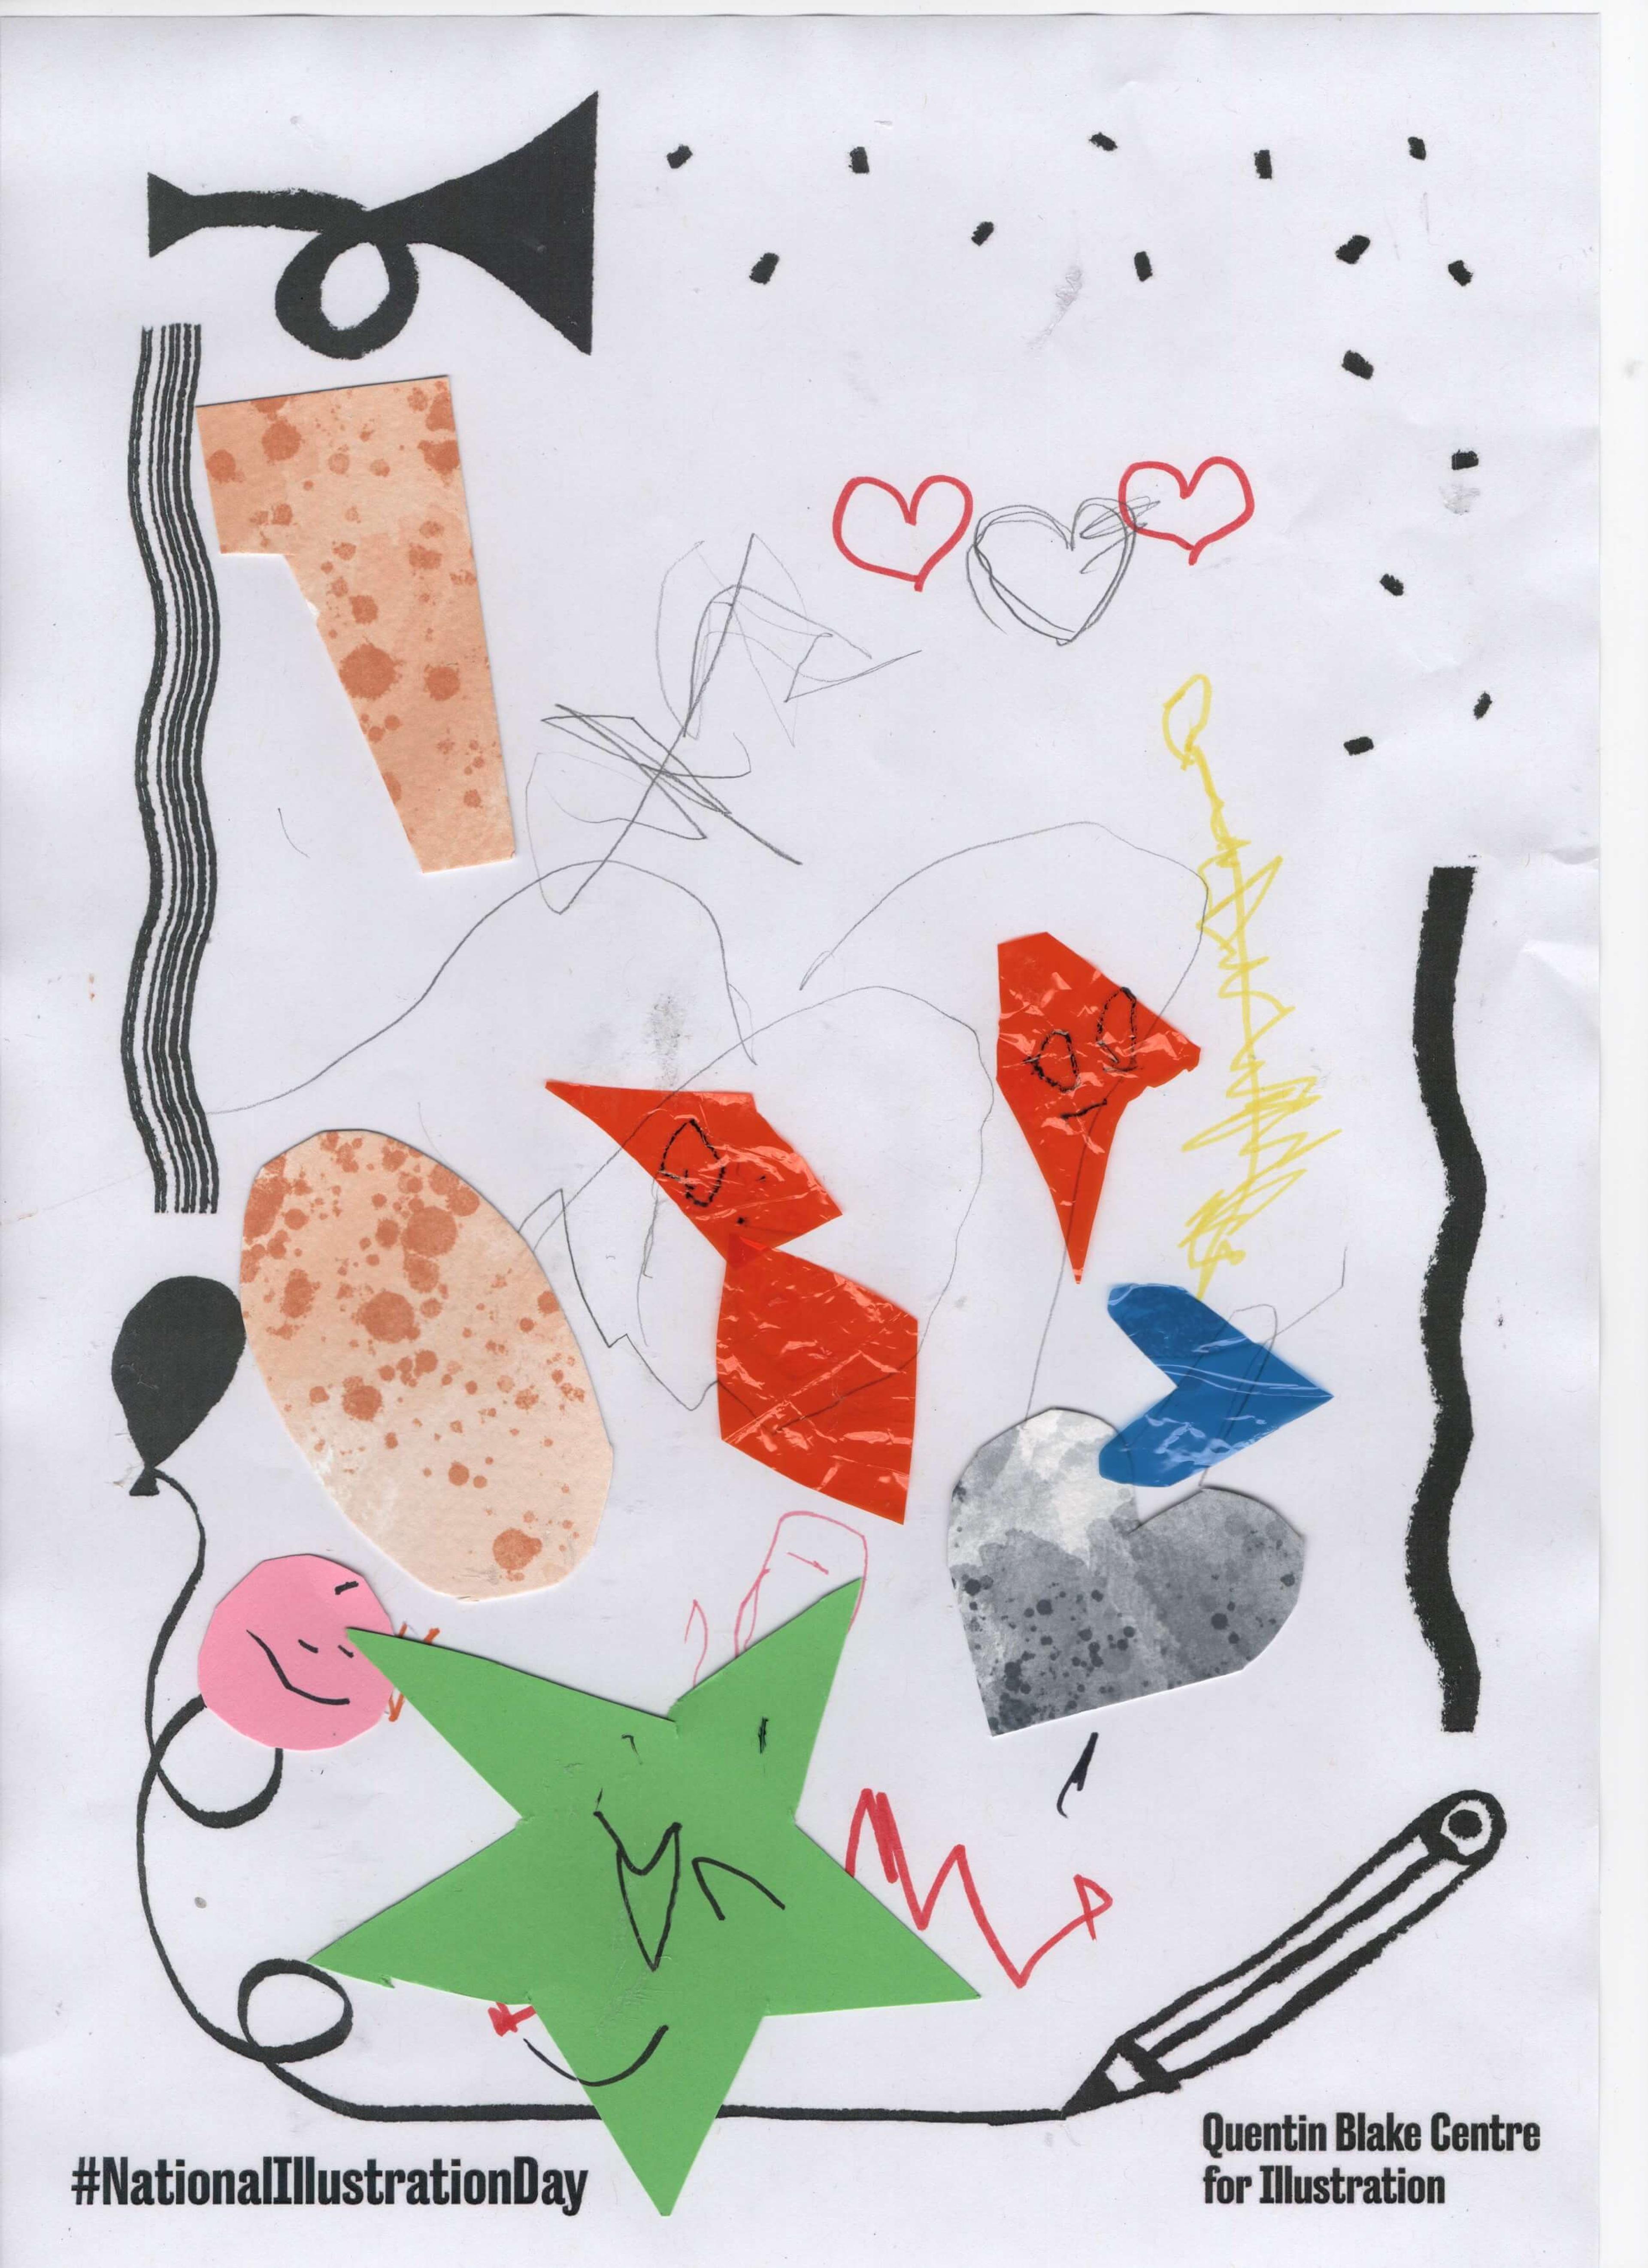 An assortment of shapes, such as stars, hearts and squares, cut out from collage paper or intuitively drawn on using pencil. 